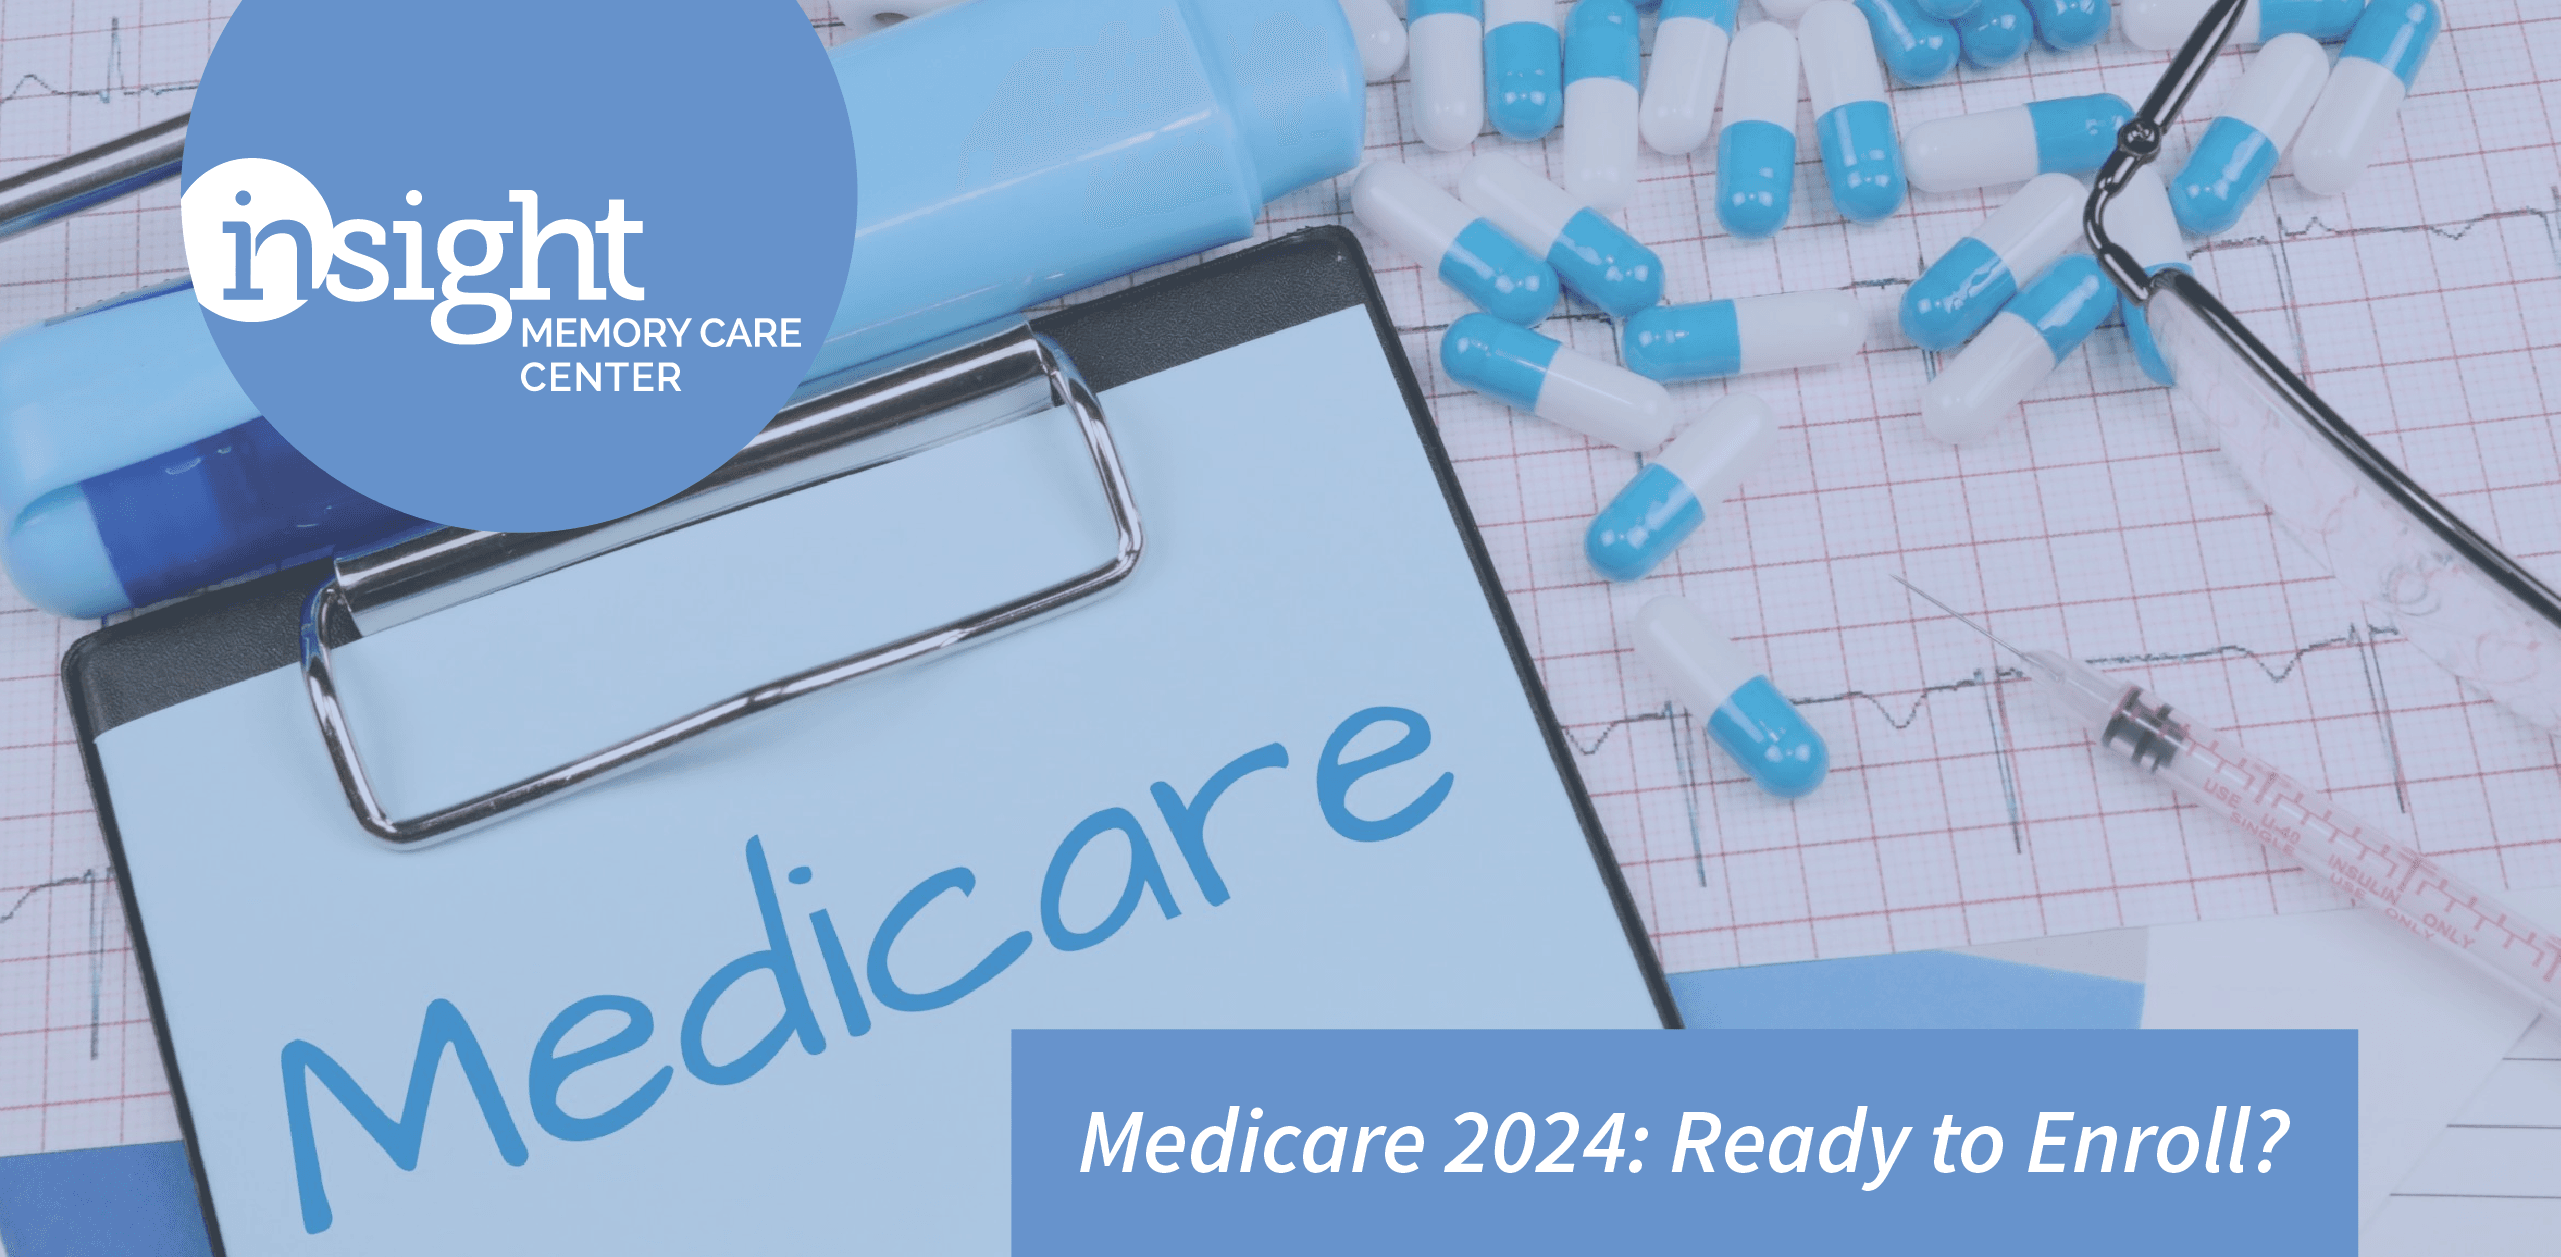 Medicare 2024 - Ready to Enroll?